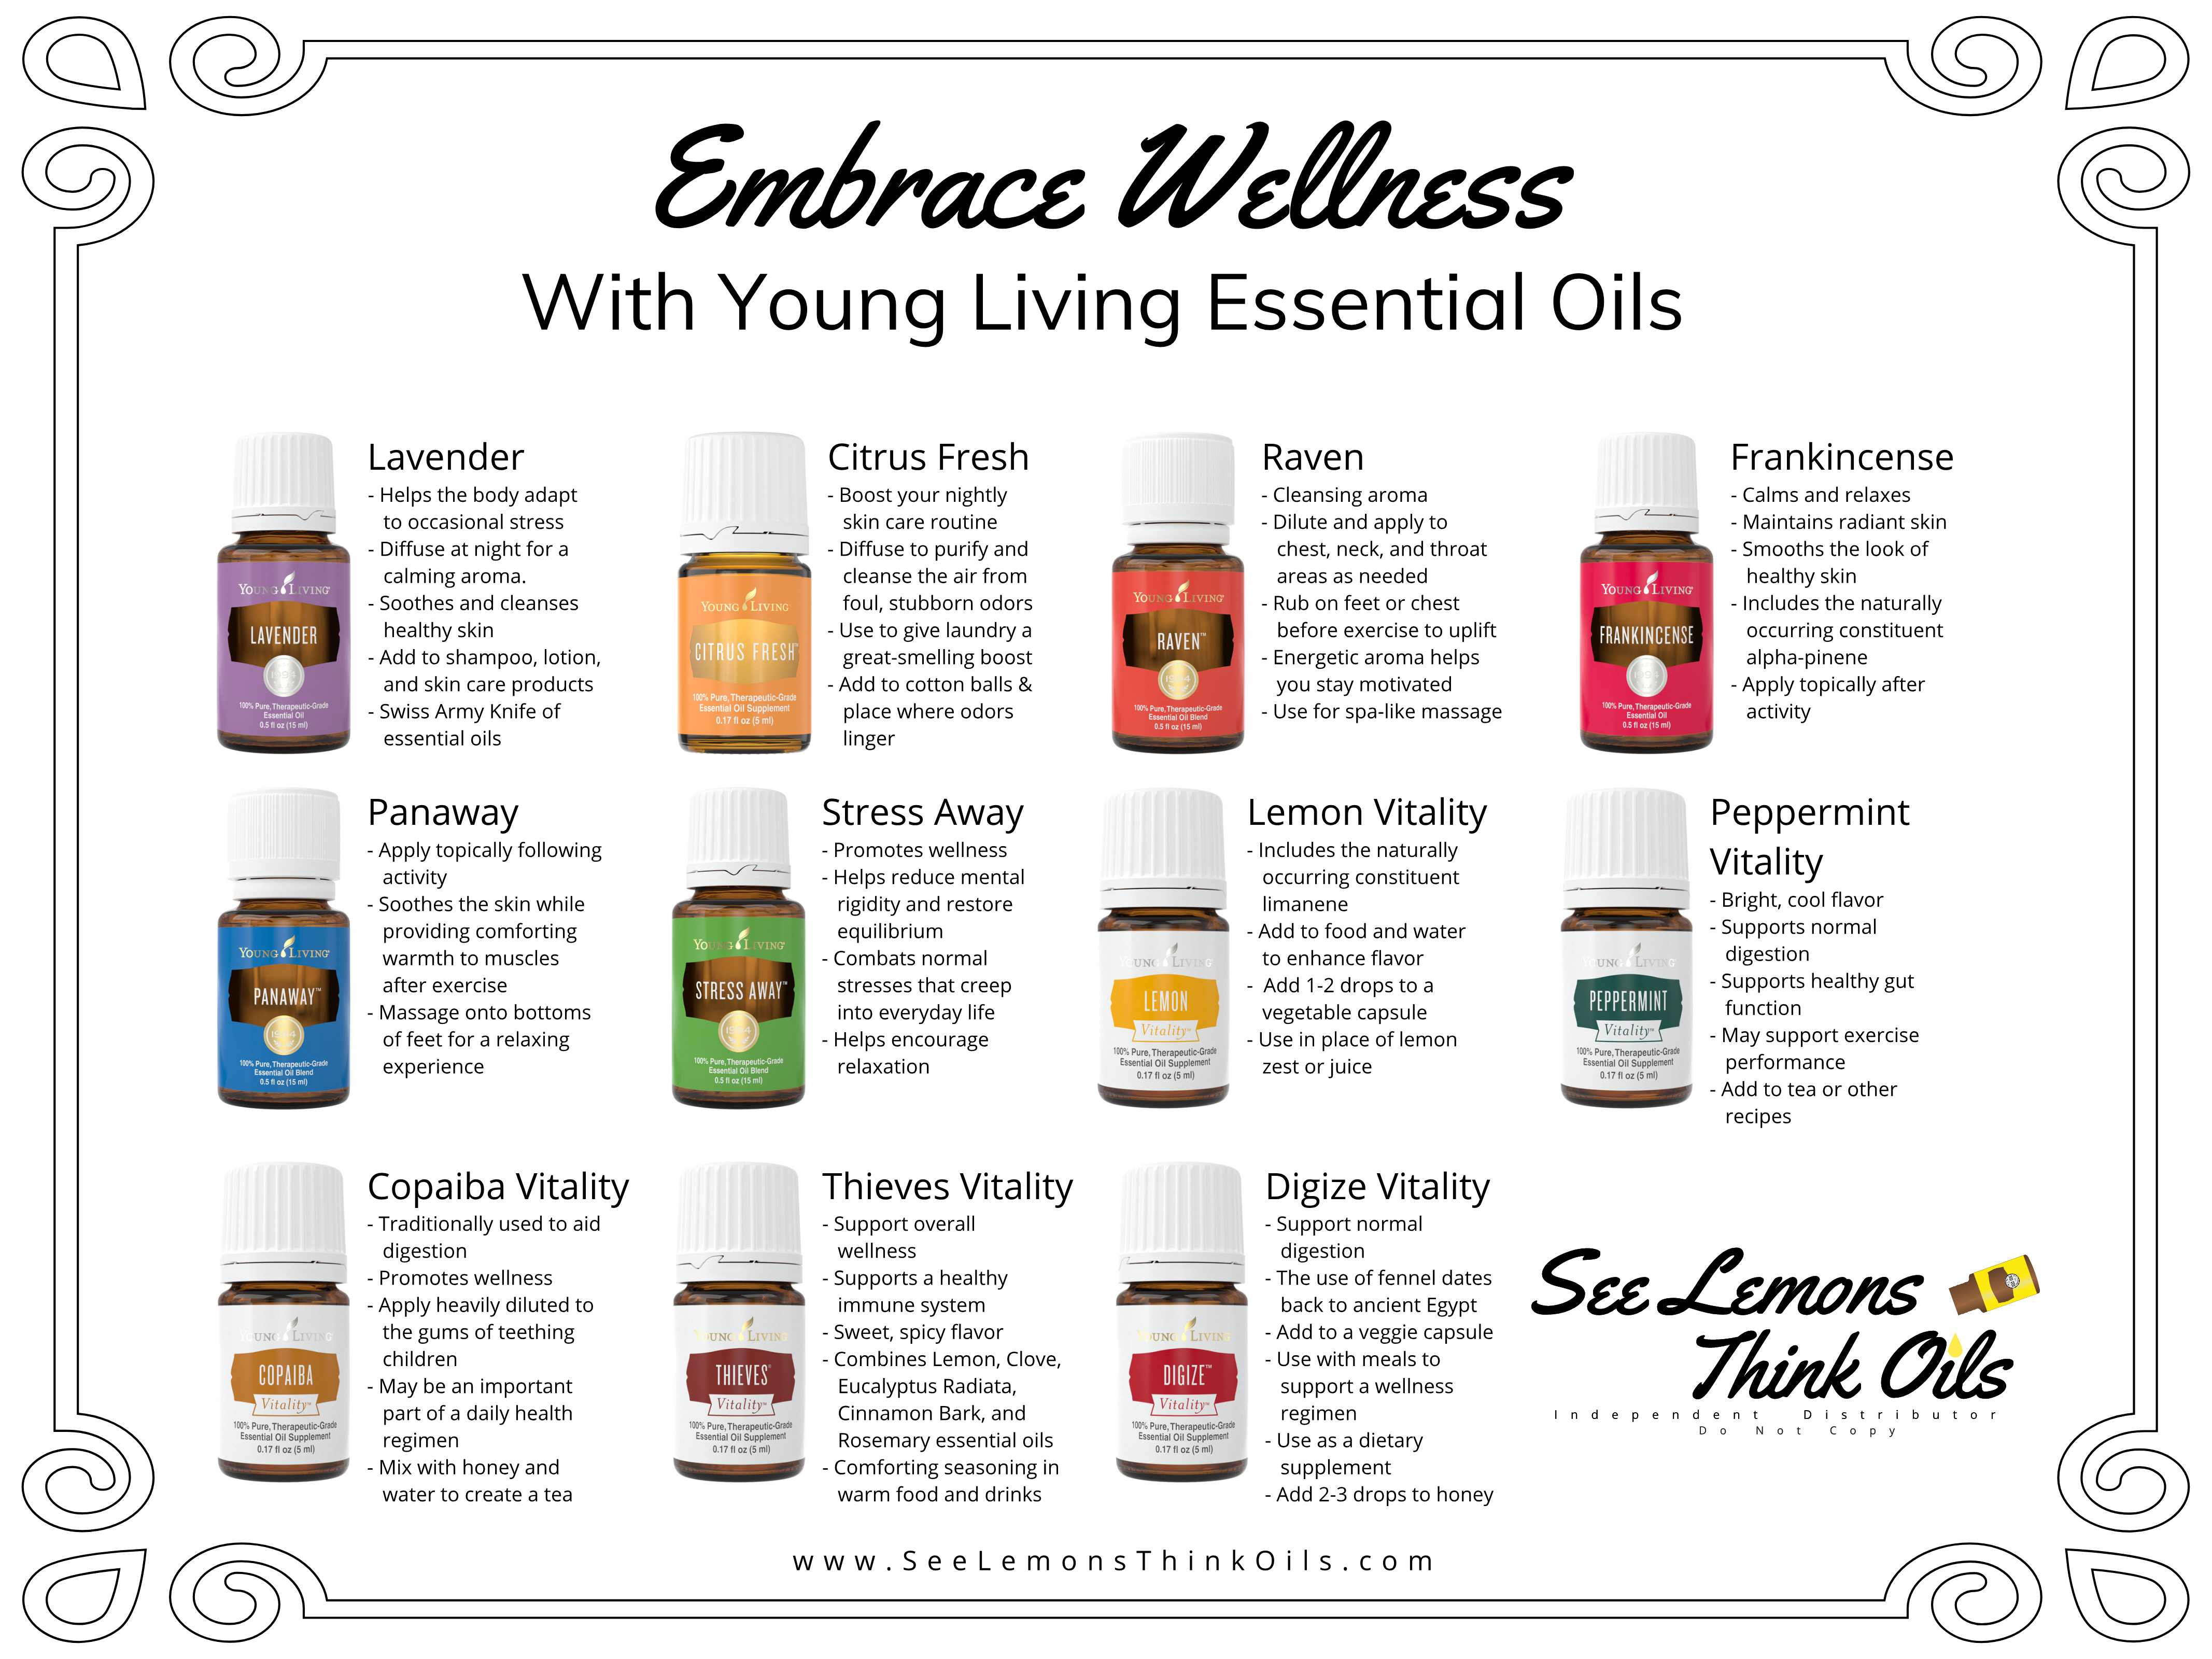 Embrace wellness with Young Living essential oils.